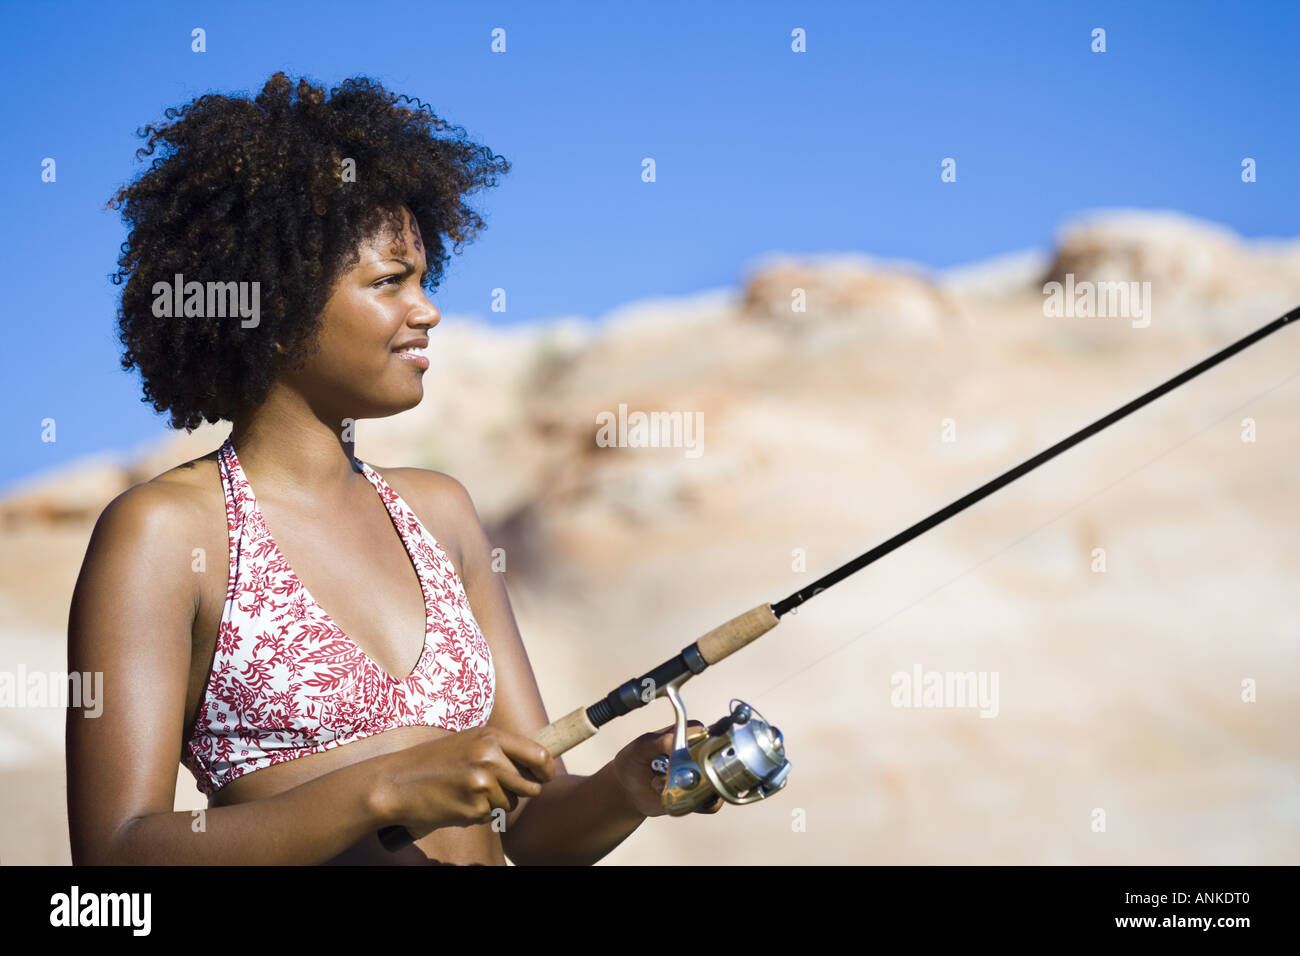 Close up of a young woman fishing Stock Photo - Alamy